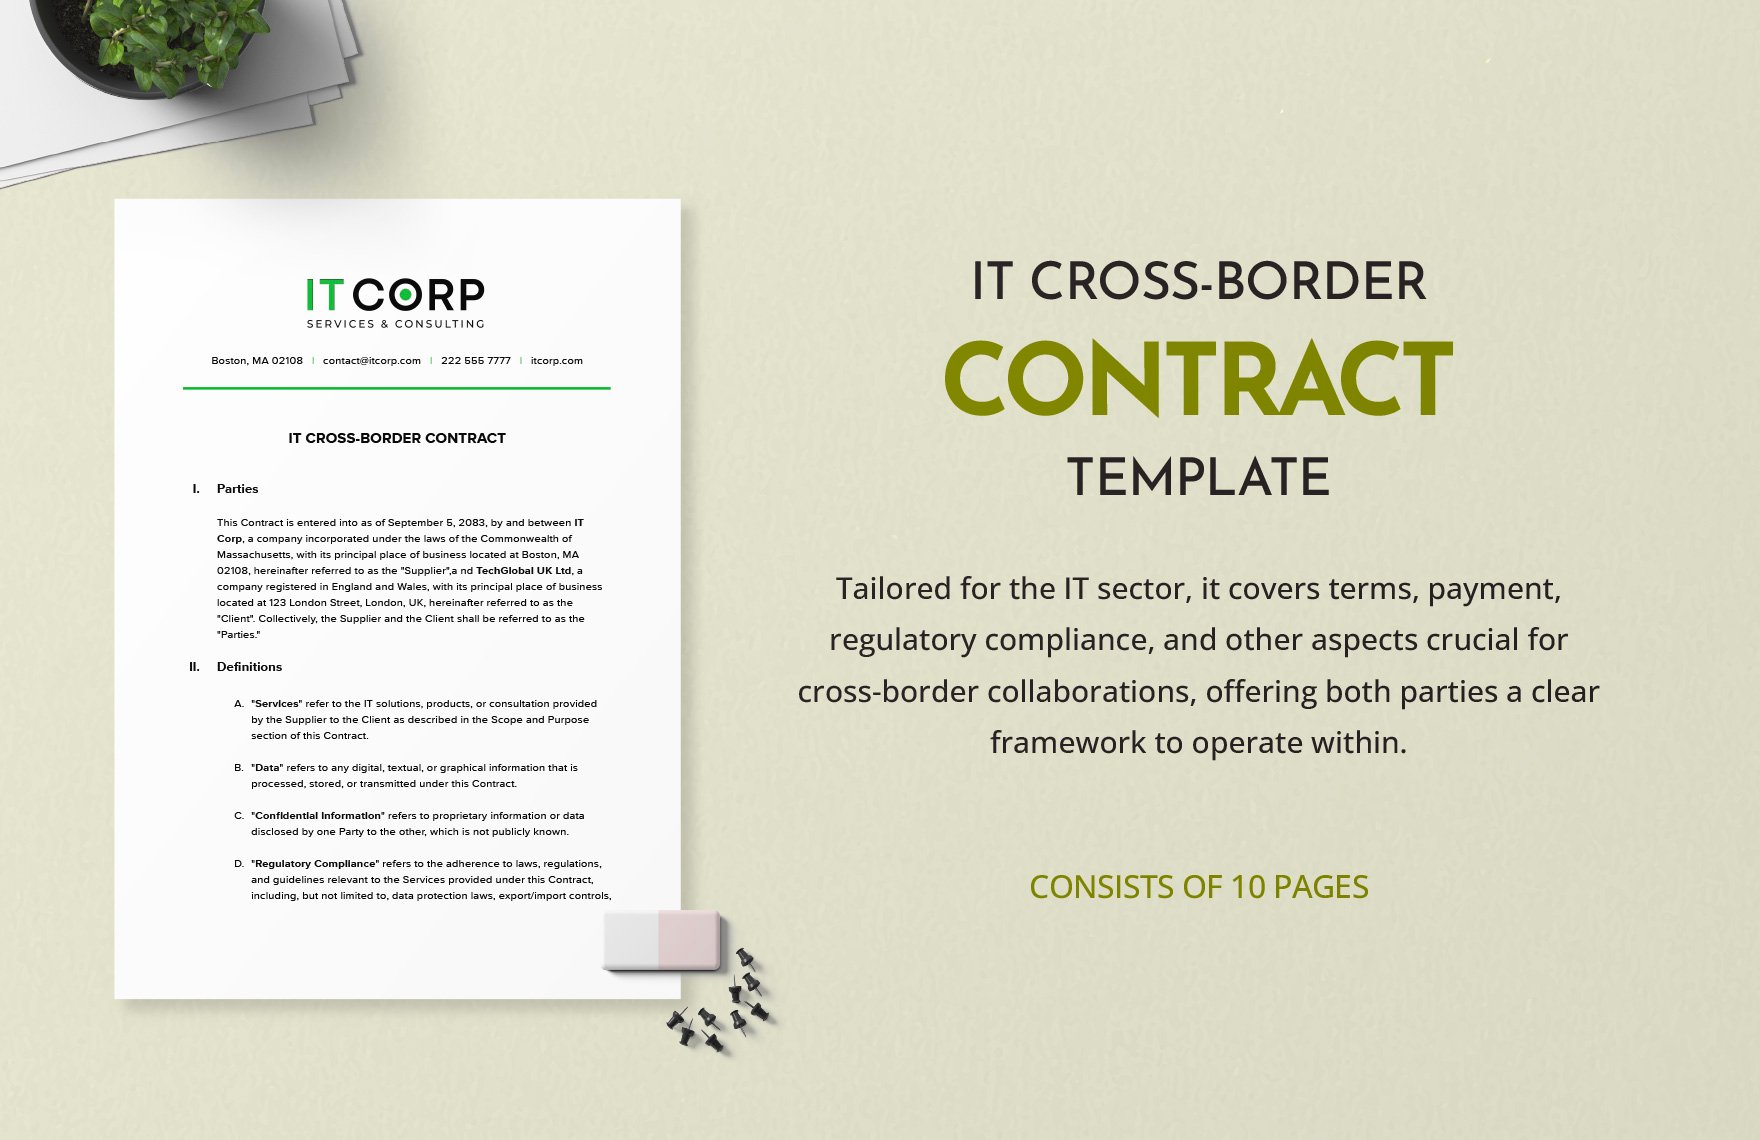 IT Cross-Border Contract Template